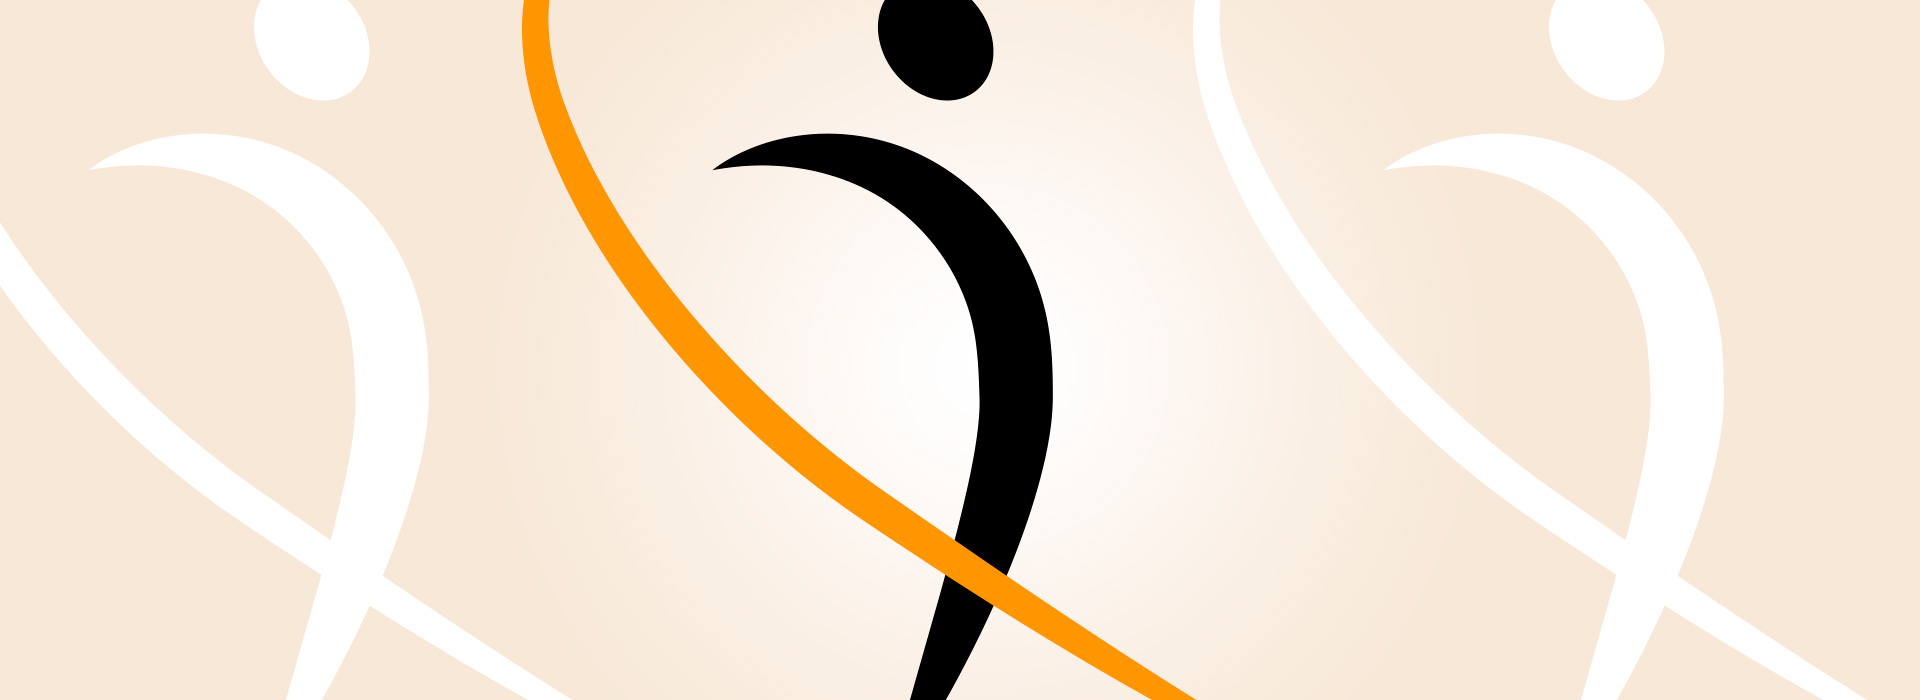 The logo illustration of a minimalistic person making a golf swing